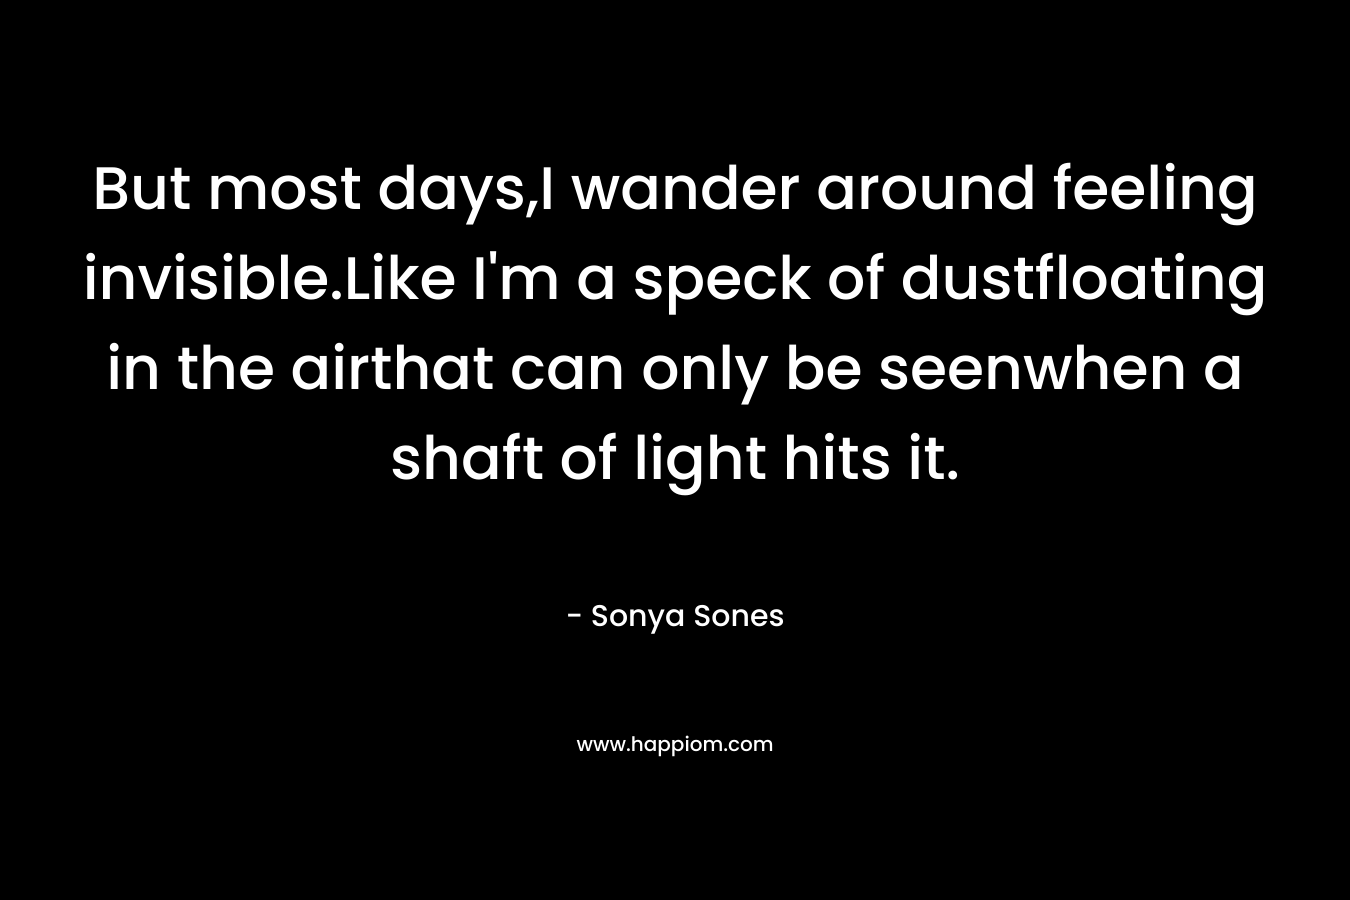 But most days,I wander around feeling invisible.Like I’m a speck of dustfloating in the airthat can only be seenwhen a shaft of light hits it. – Sonya Sones